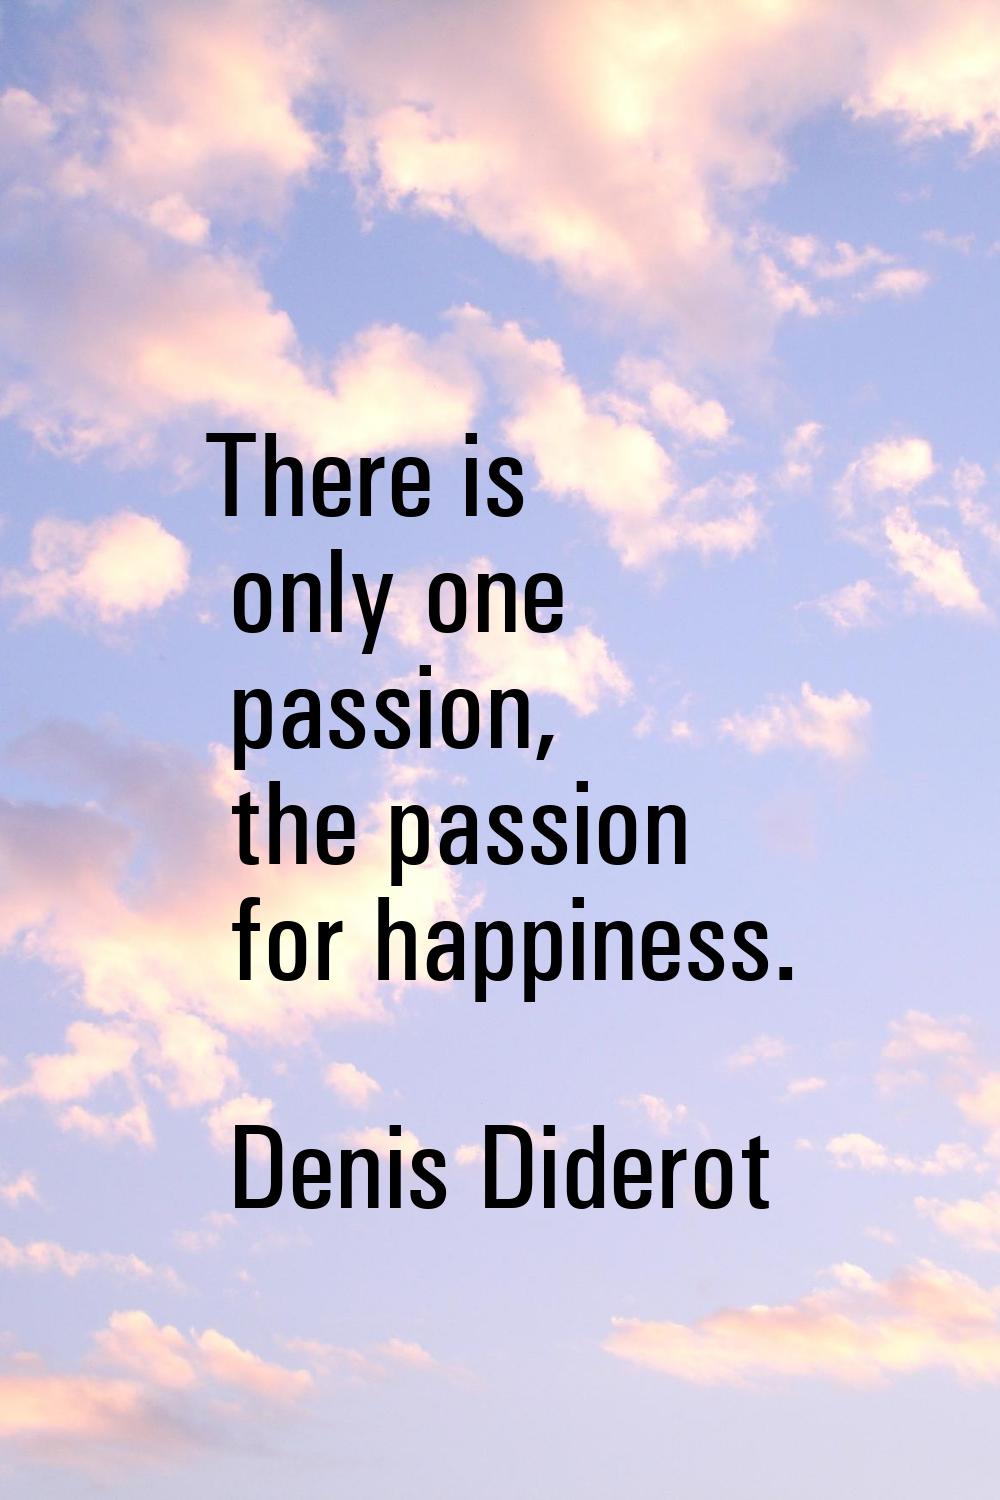 There is only one passion, the passion for happiness.